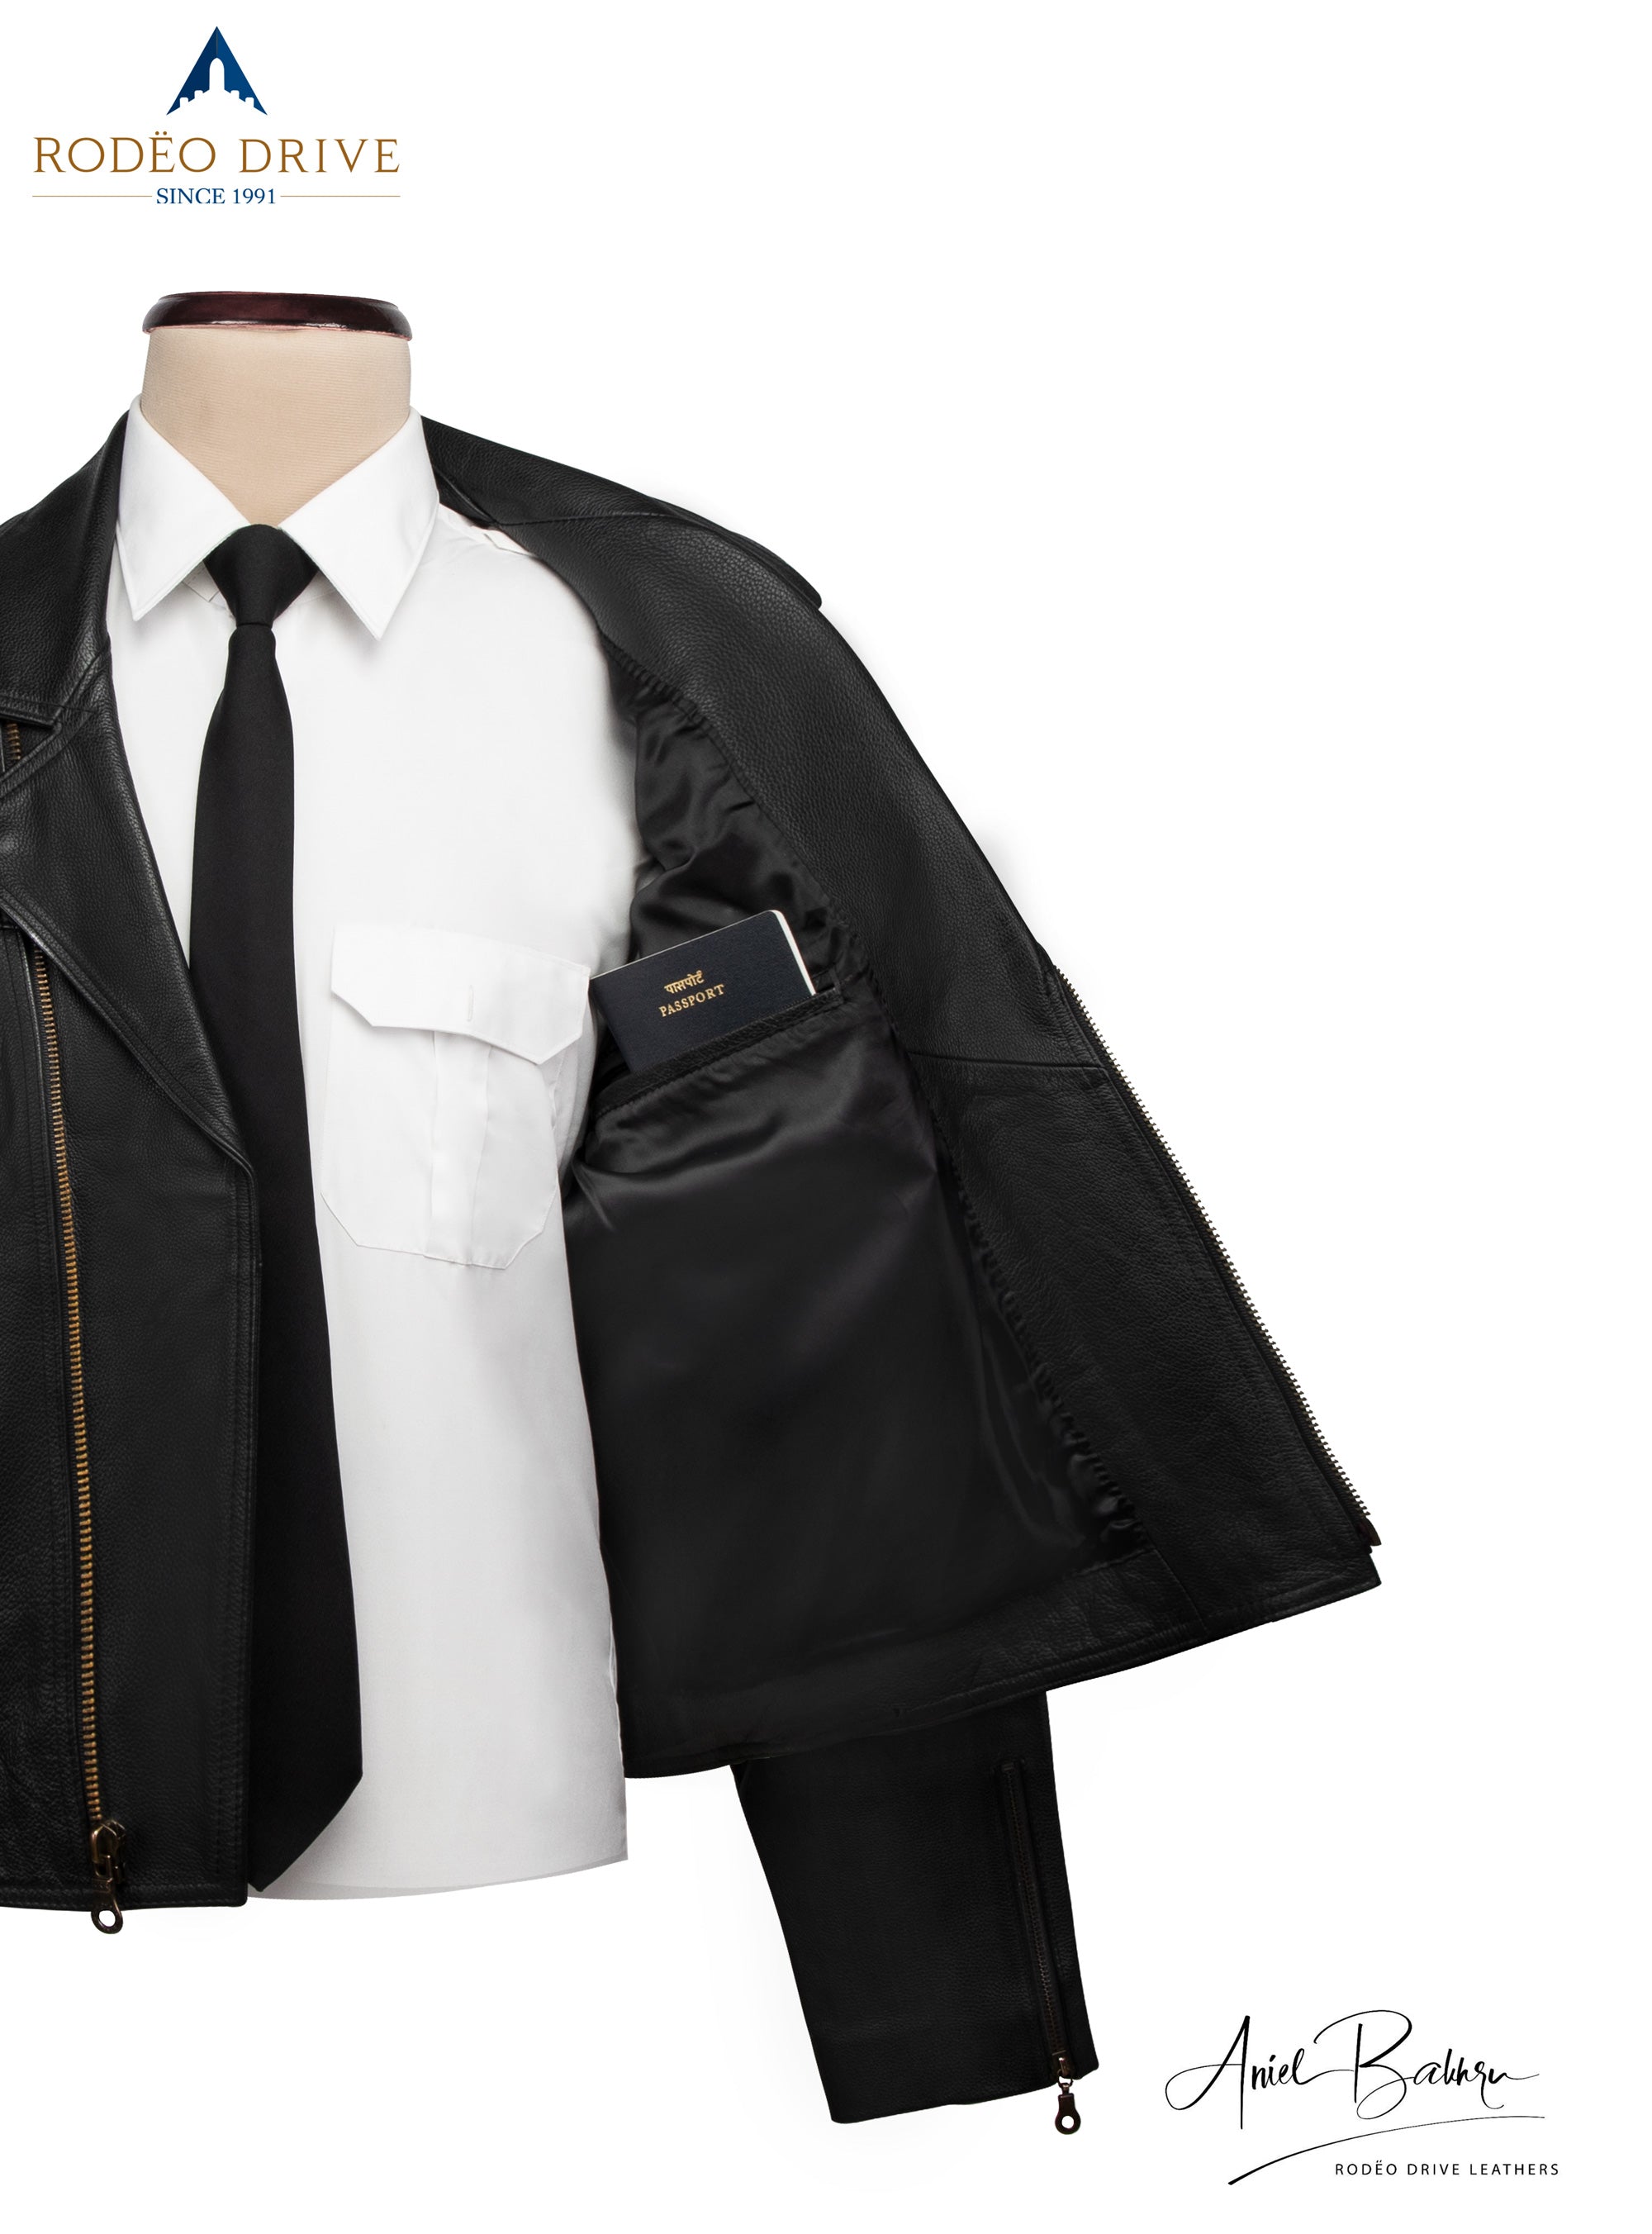 Front image of HARLEY JACKET. It is displayed on mannequin. Inside a white shirt and neck tie are visible